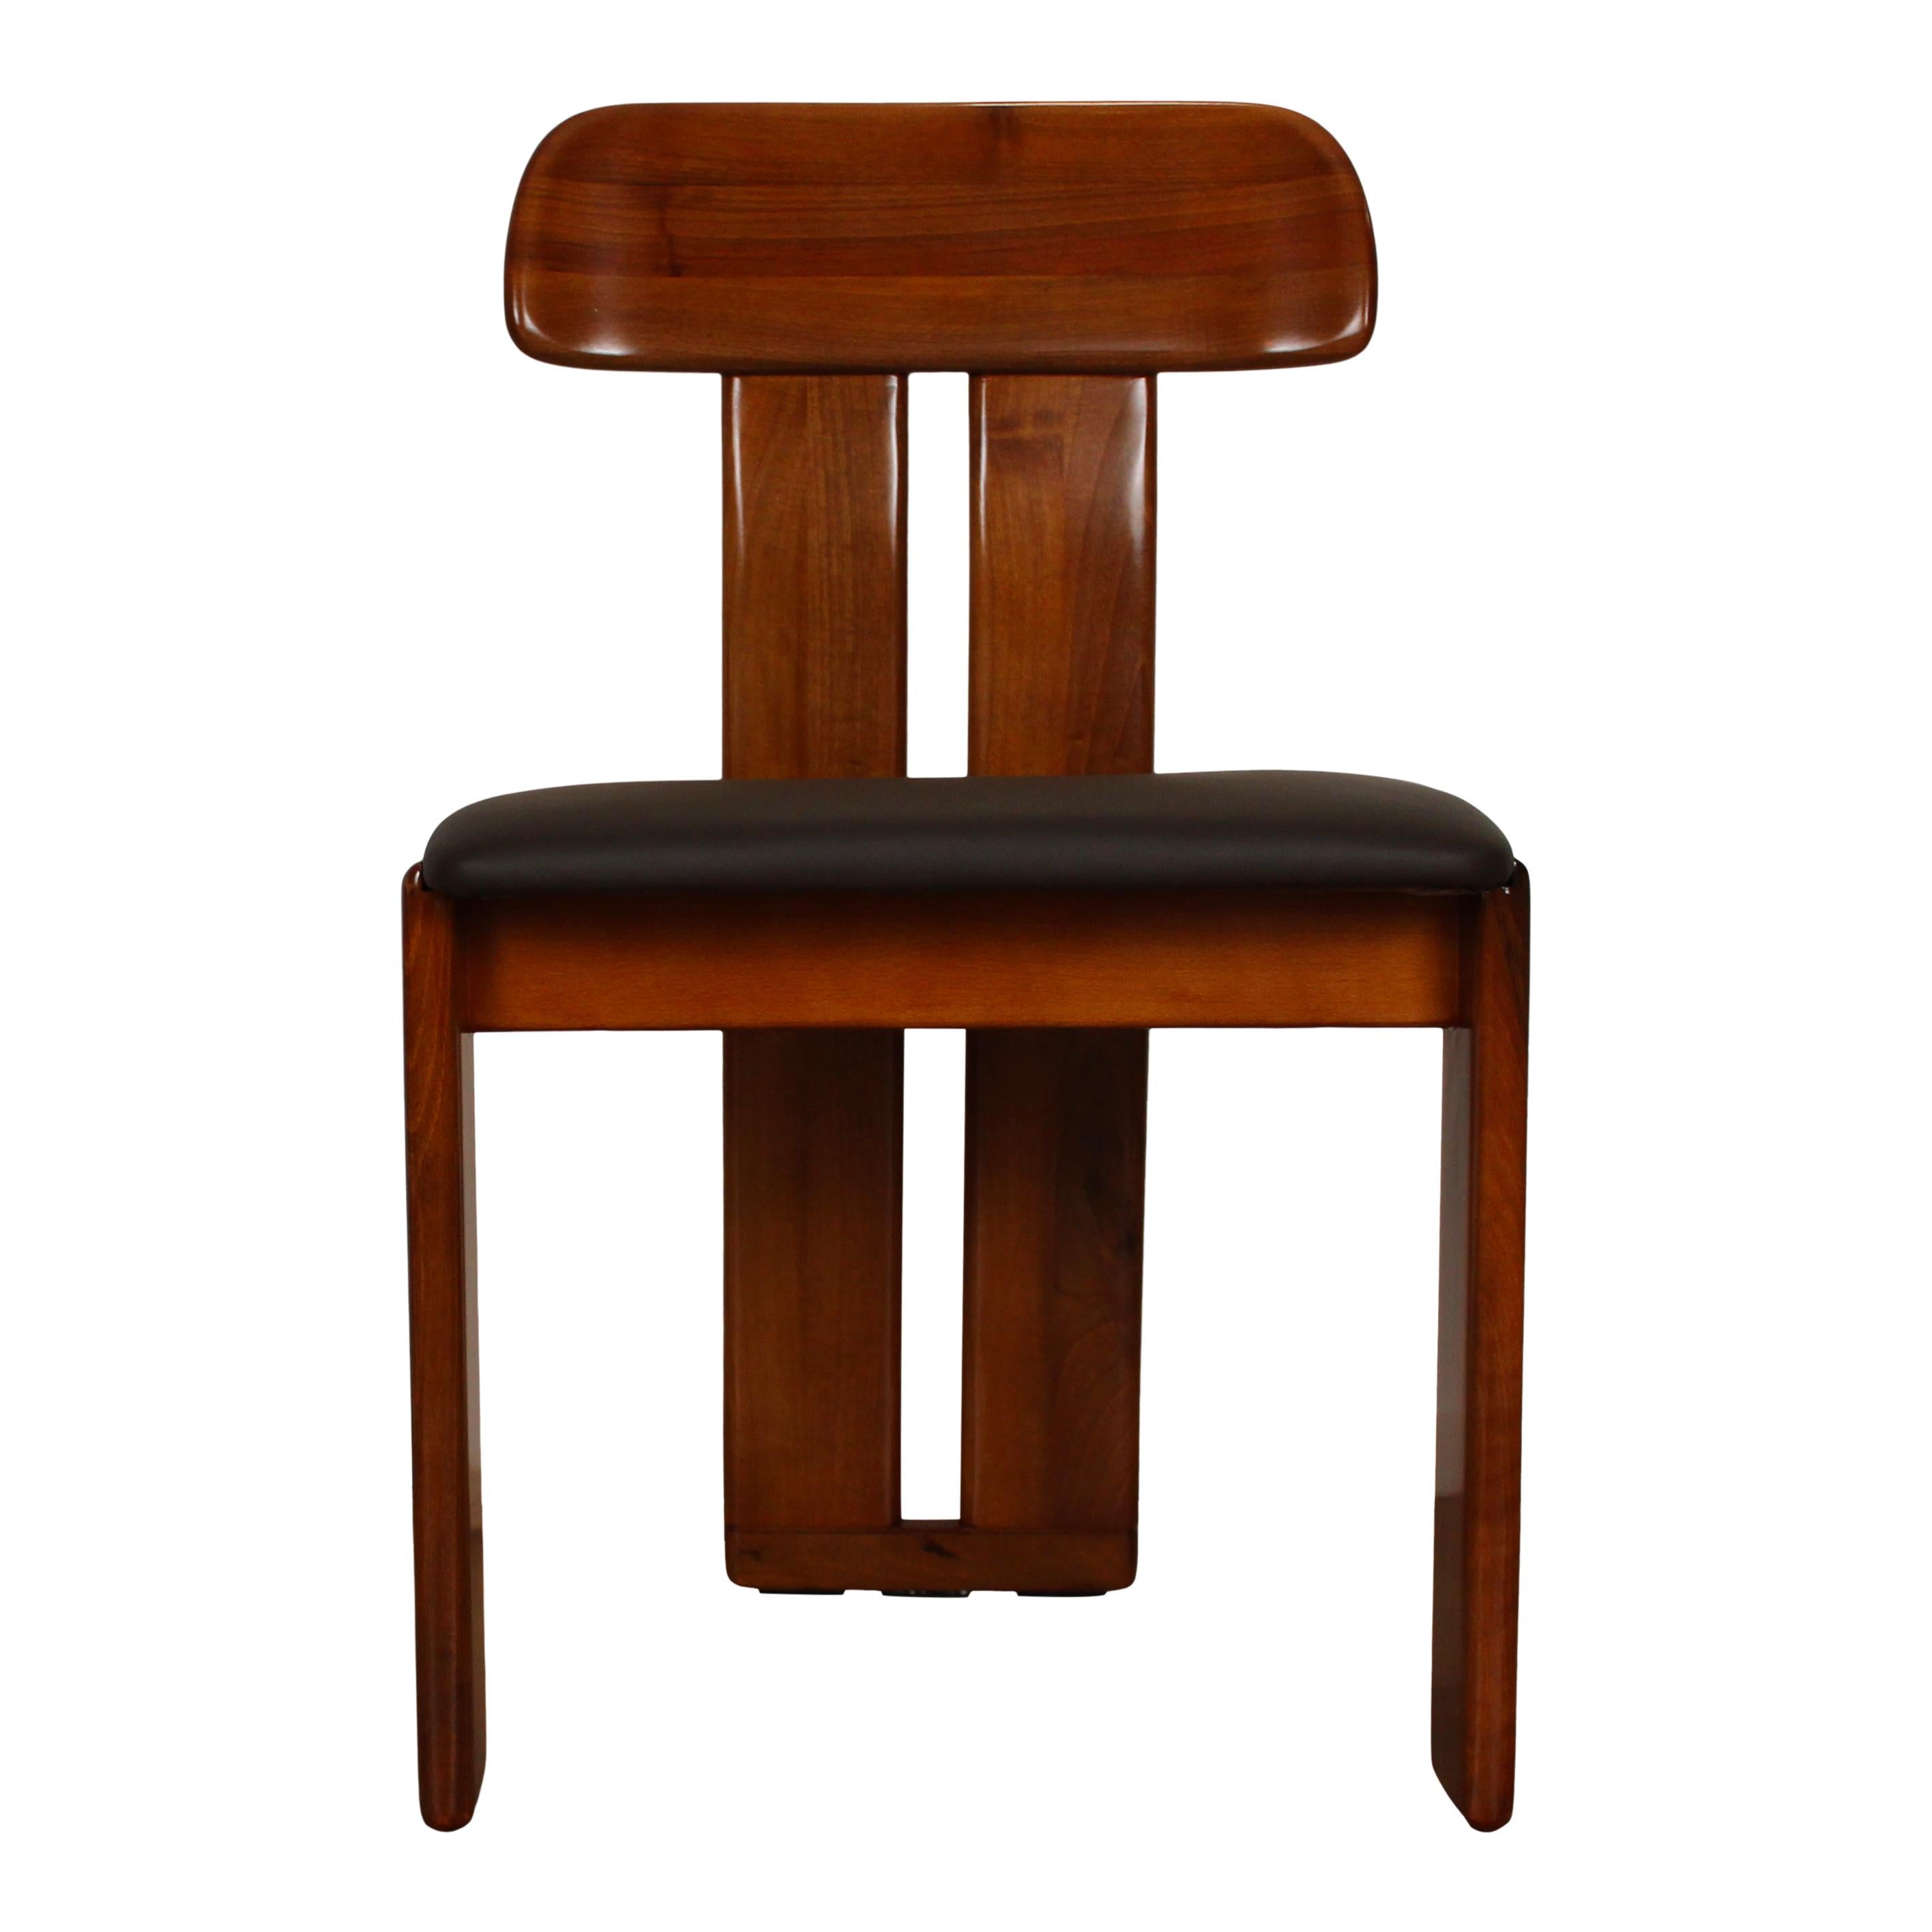 Mario Marenco Walnut Sapporo Dining Chairs for Mobilgirgi, 1970s, Set of 8 For Sale 3